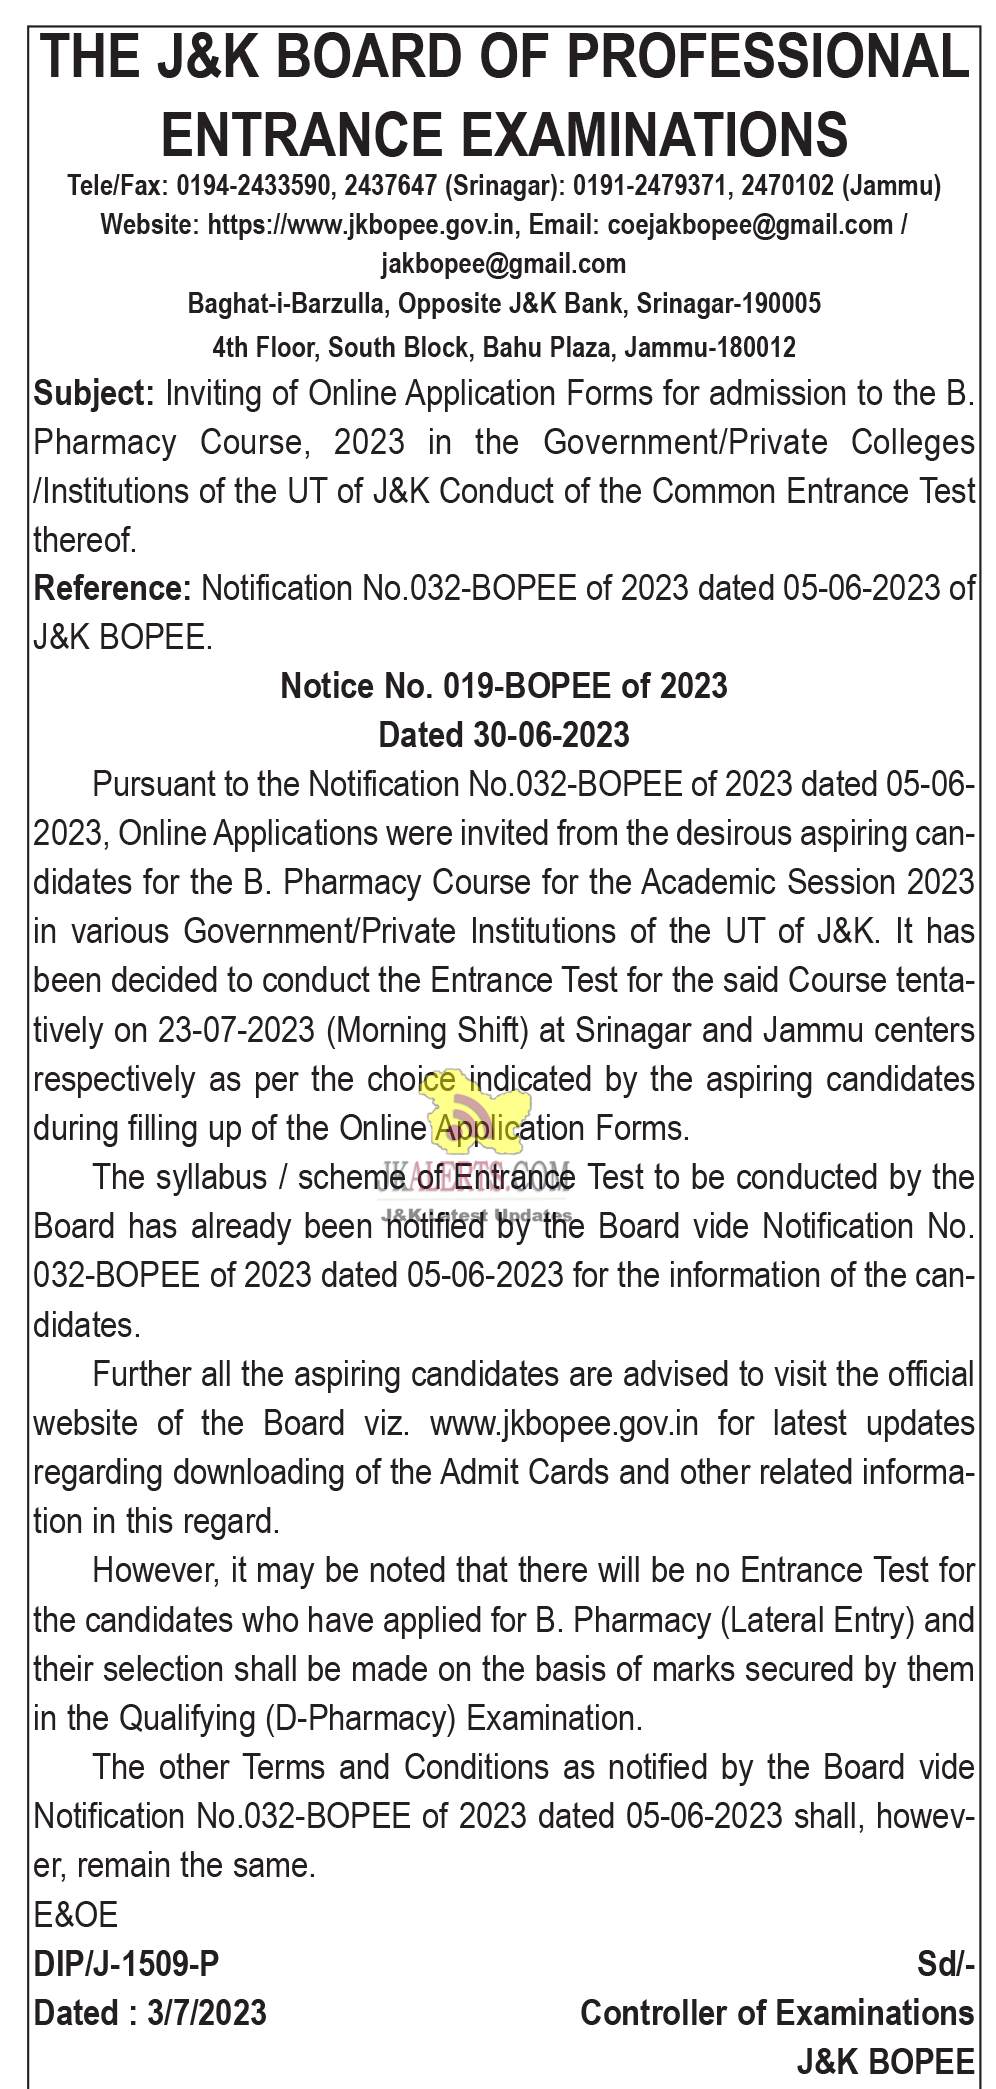 JKBOPEE admission to the B.Pharmacy Course, 2023